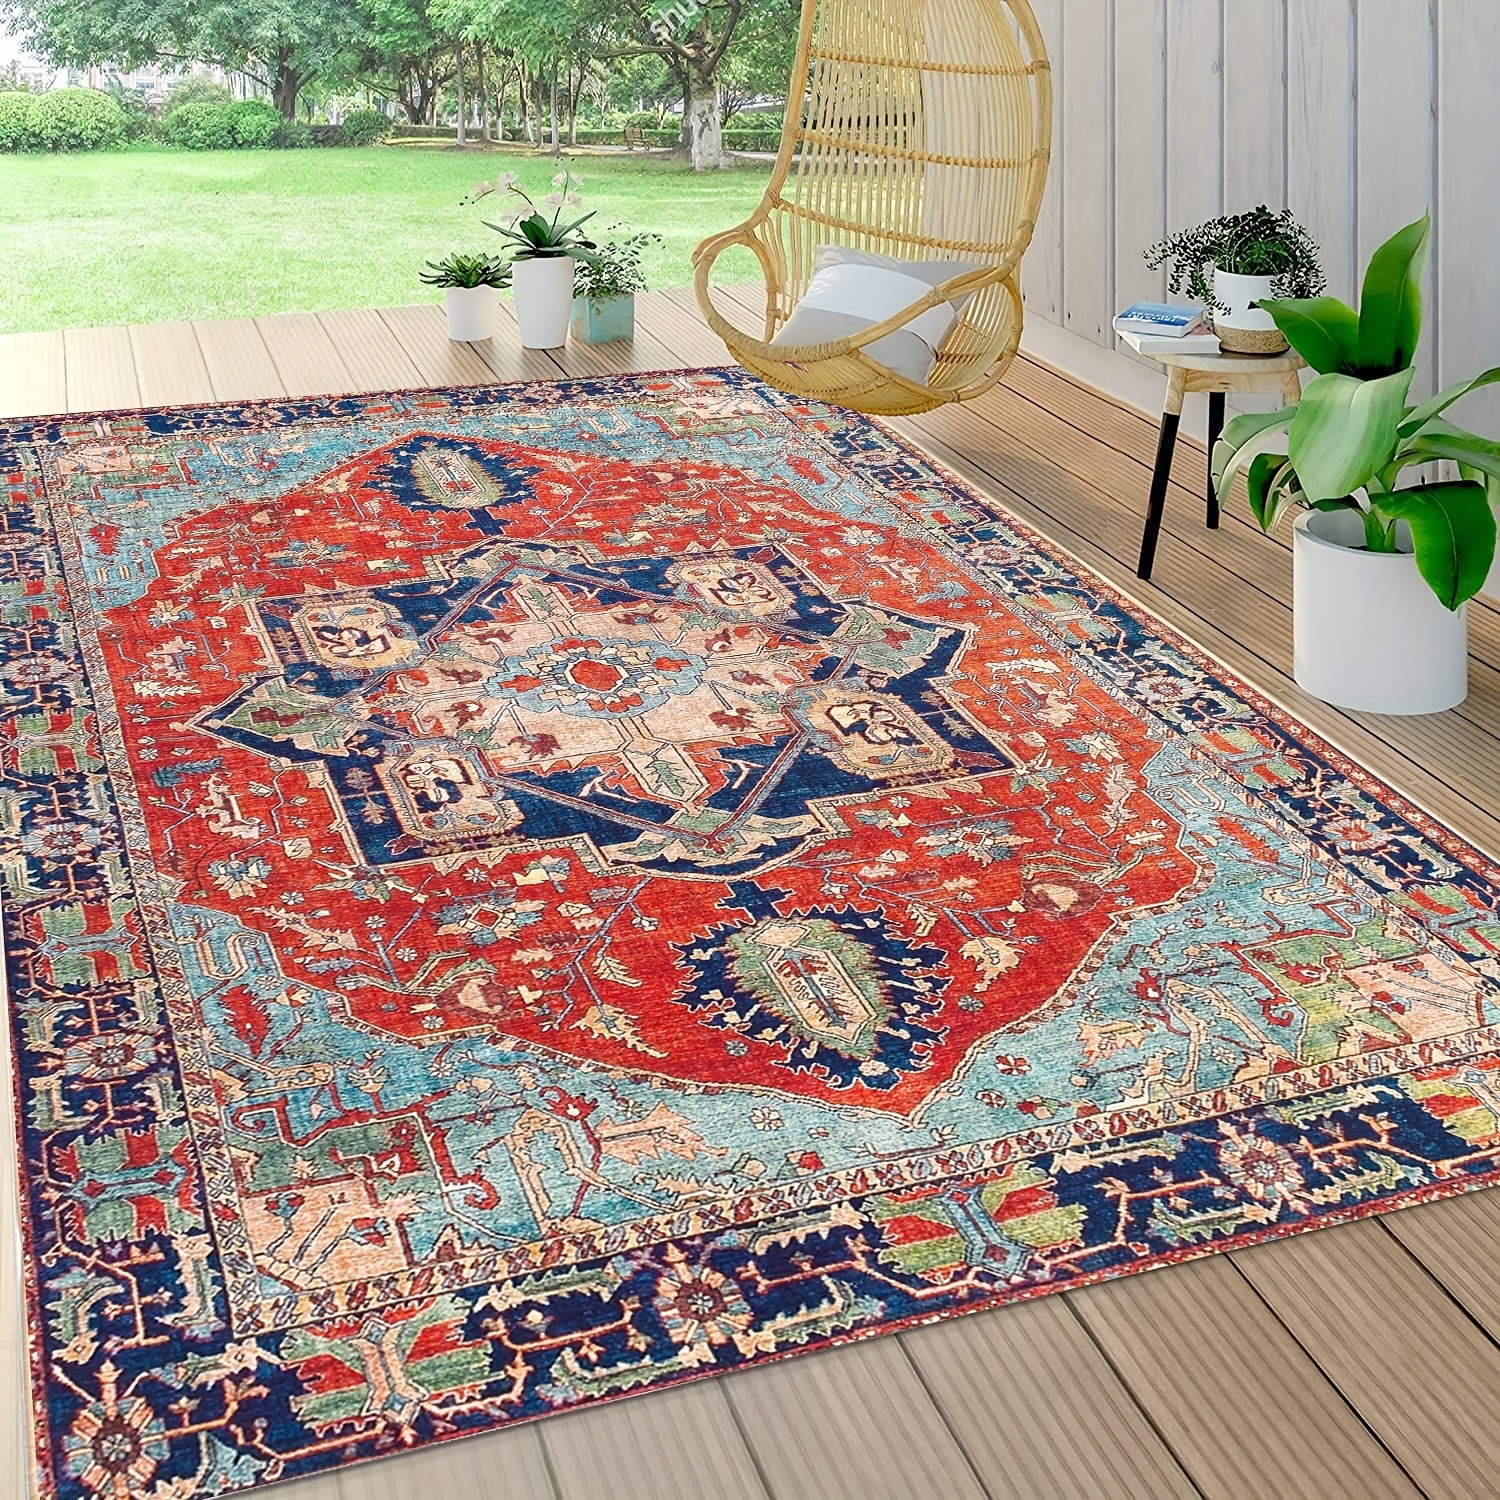 Outdoor Rugs 9X12 for Patios Clearance,Large Waterproof Rug for Camping, Porch,Rv